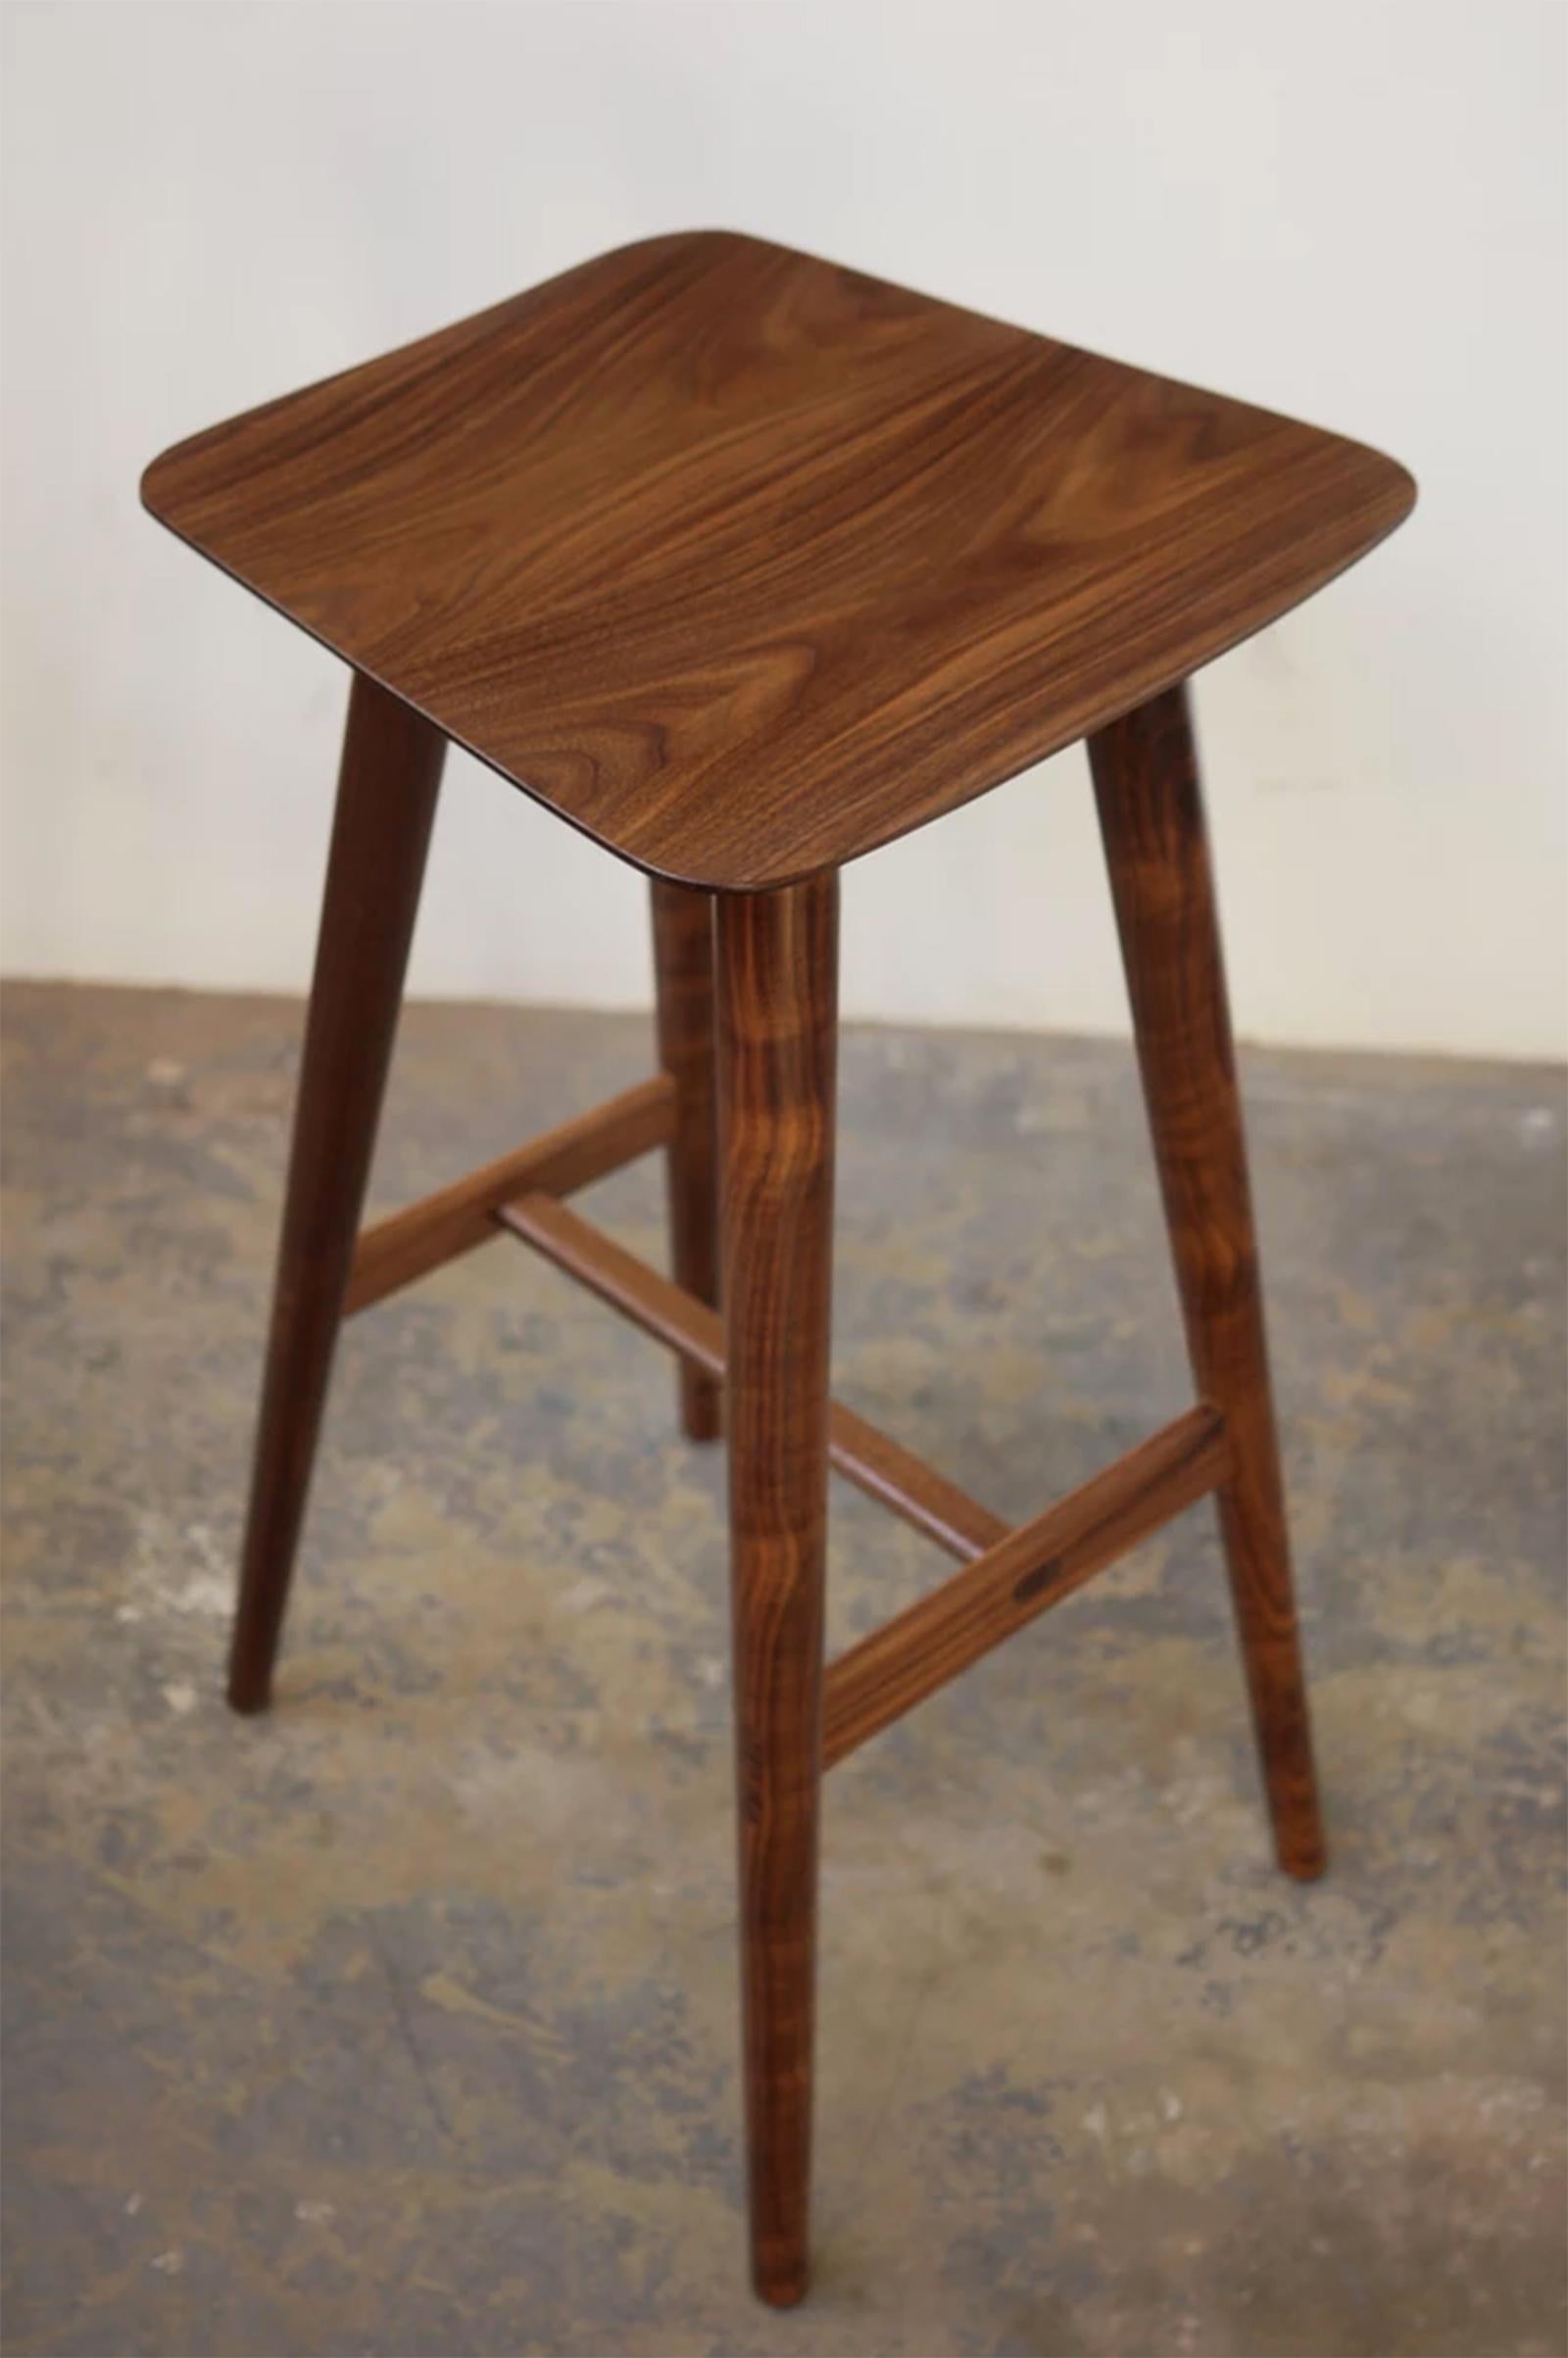 Elm Mantaray Counter Stool in Walnut Wood, Hand-Sculpted Stool by Kokora For Sale